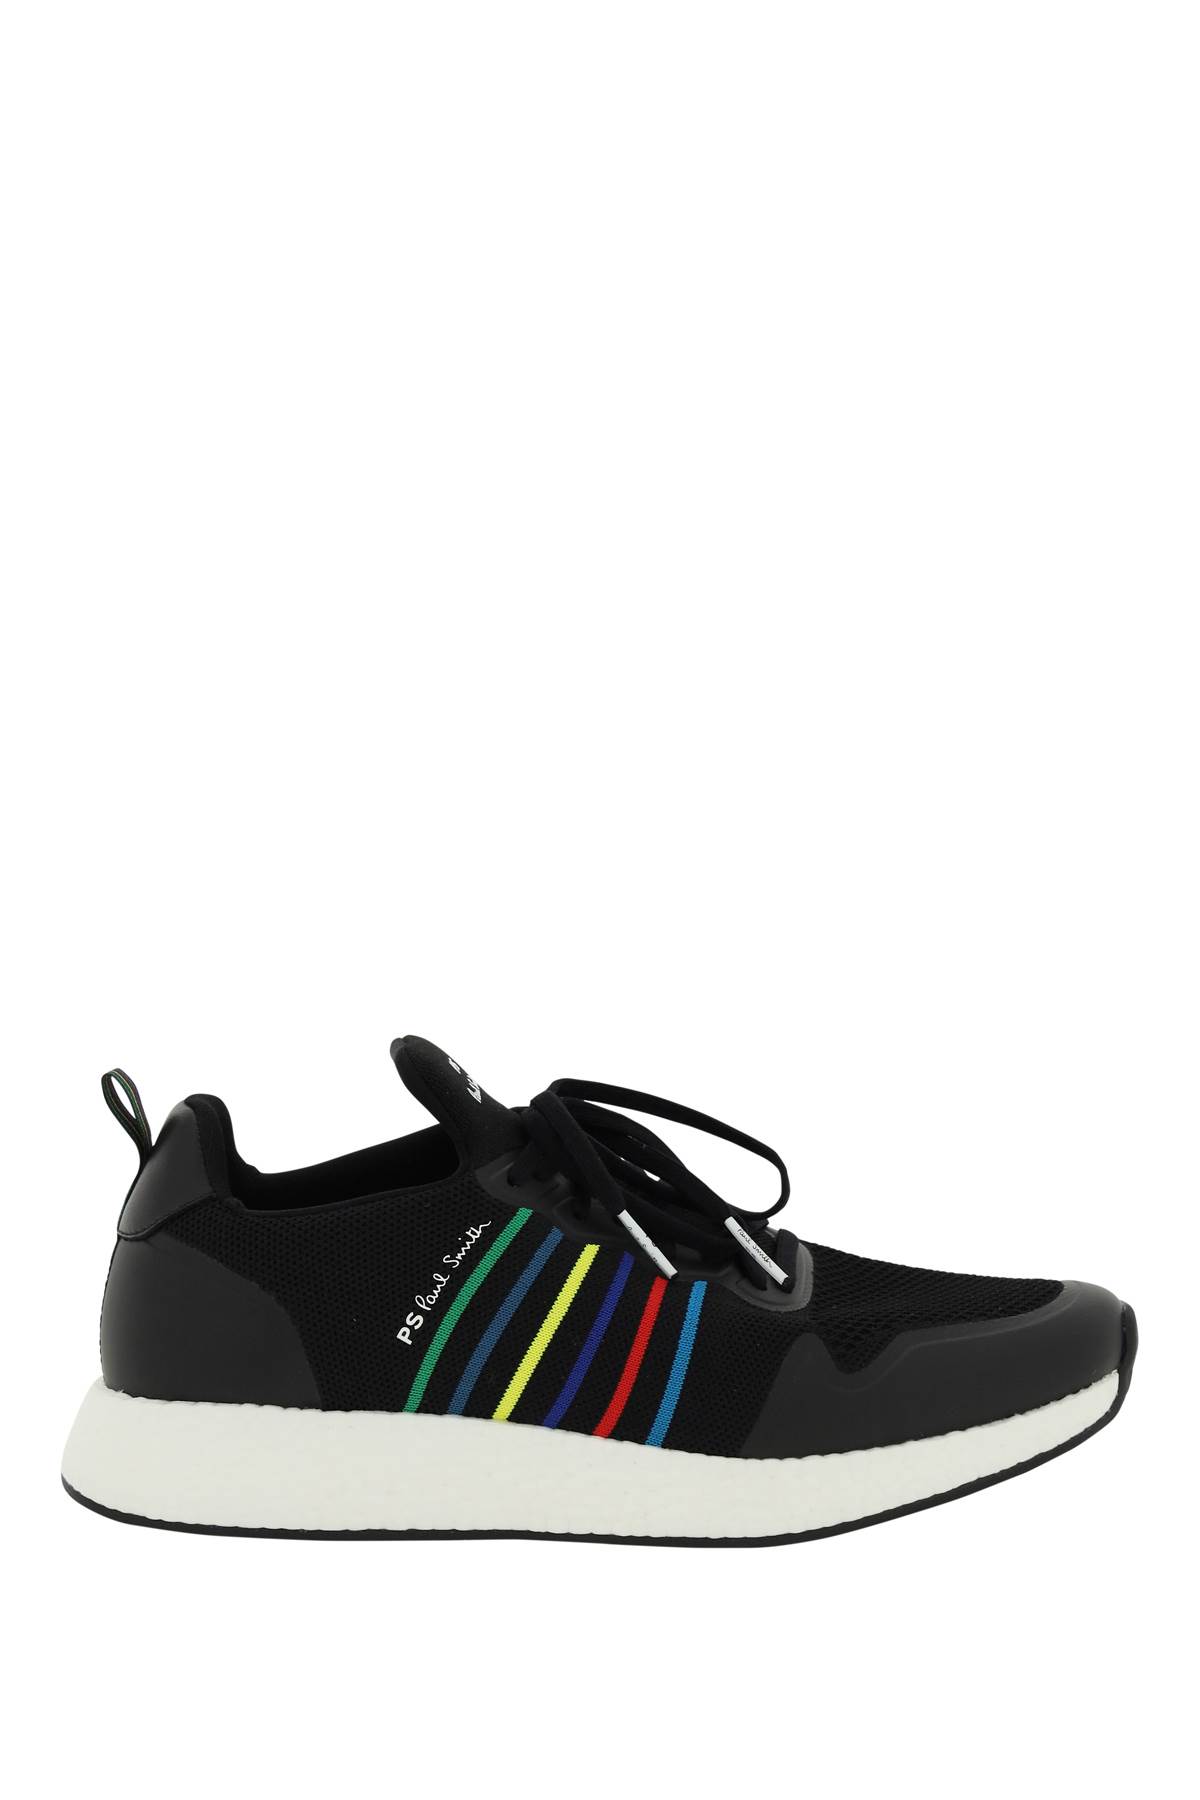 PS by Paul Smith Krios Sneakers